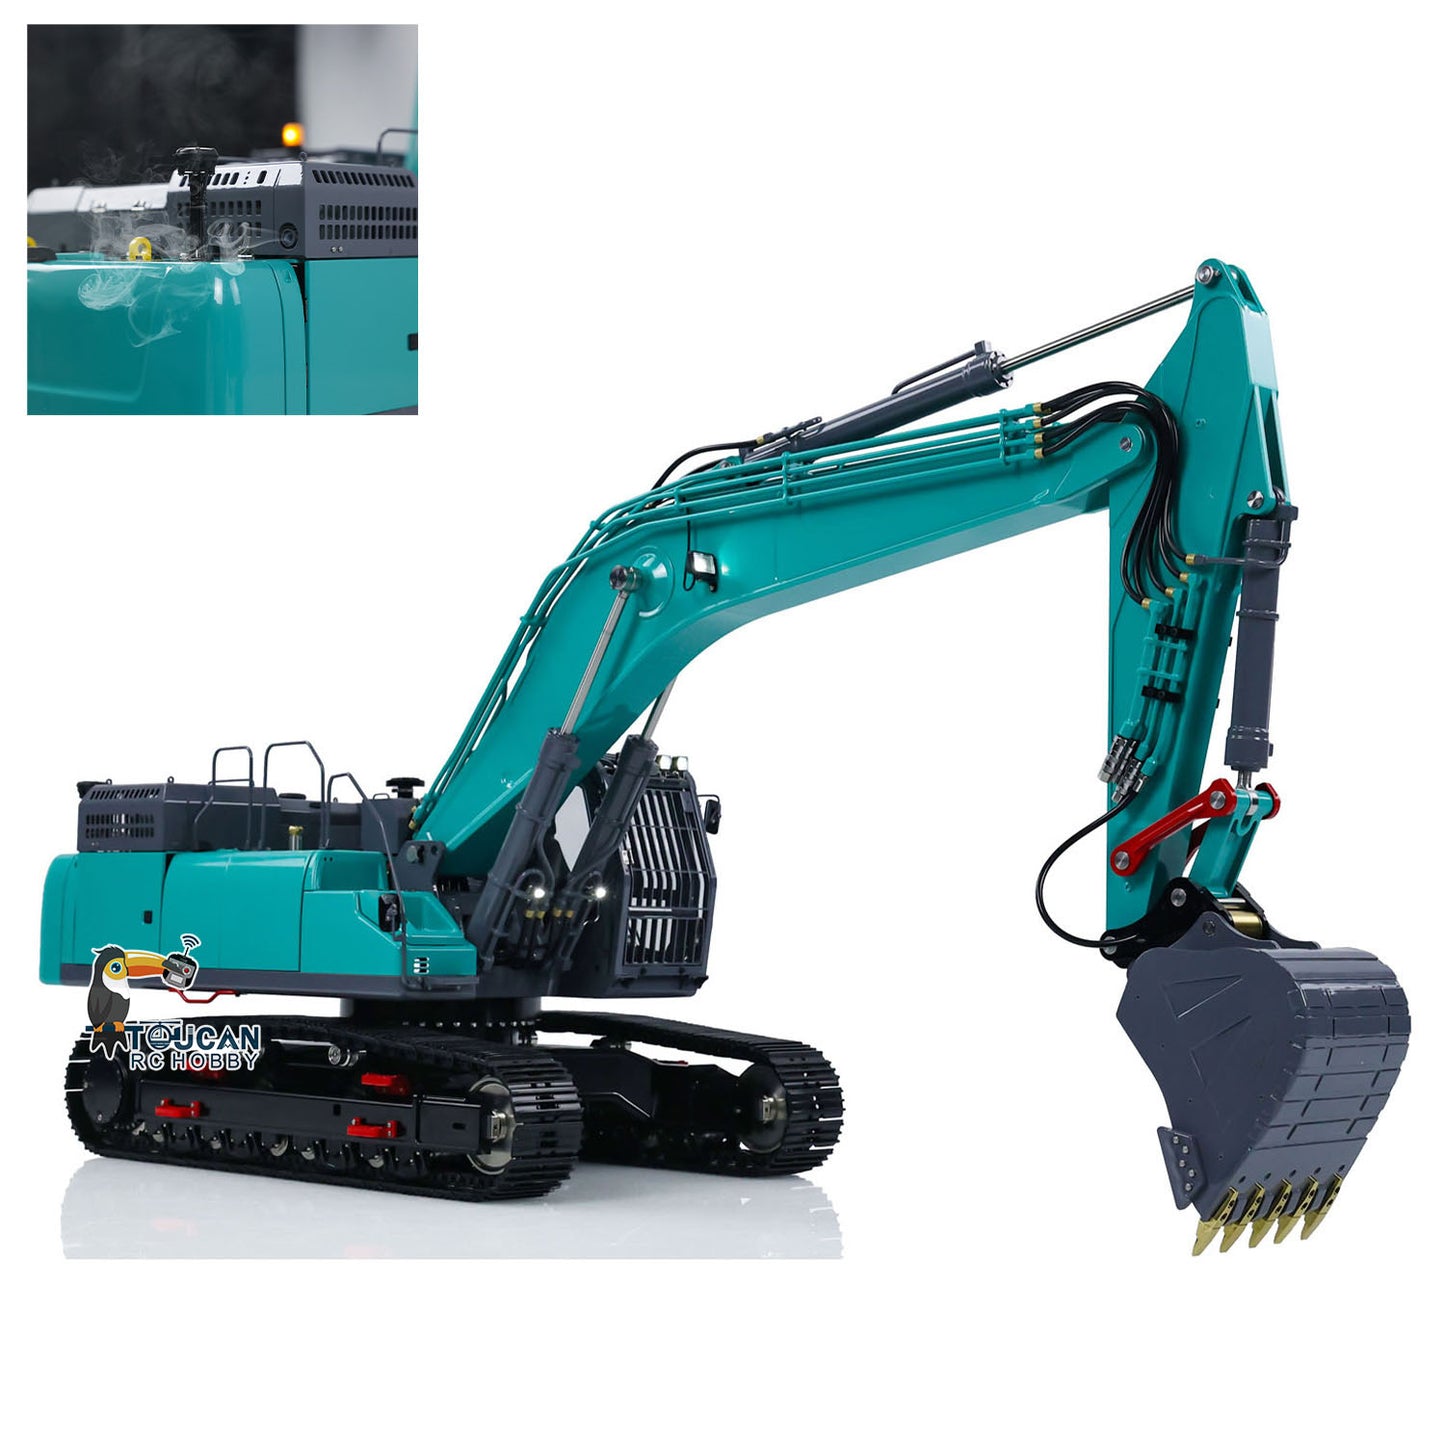 IN STOCK 1/14 LESU SK5LC RC Digger Remote Control Hydraulic Excavator Painted Assembled Vehicles DIY Hobby Models Optional Versions